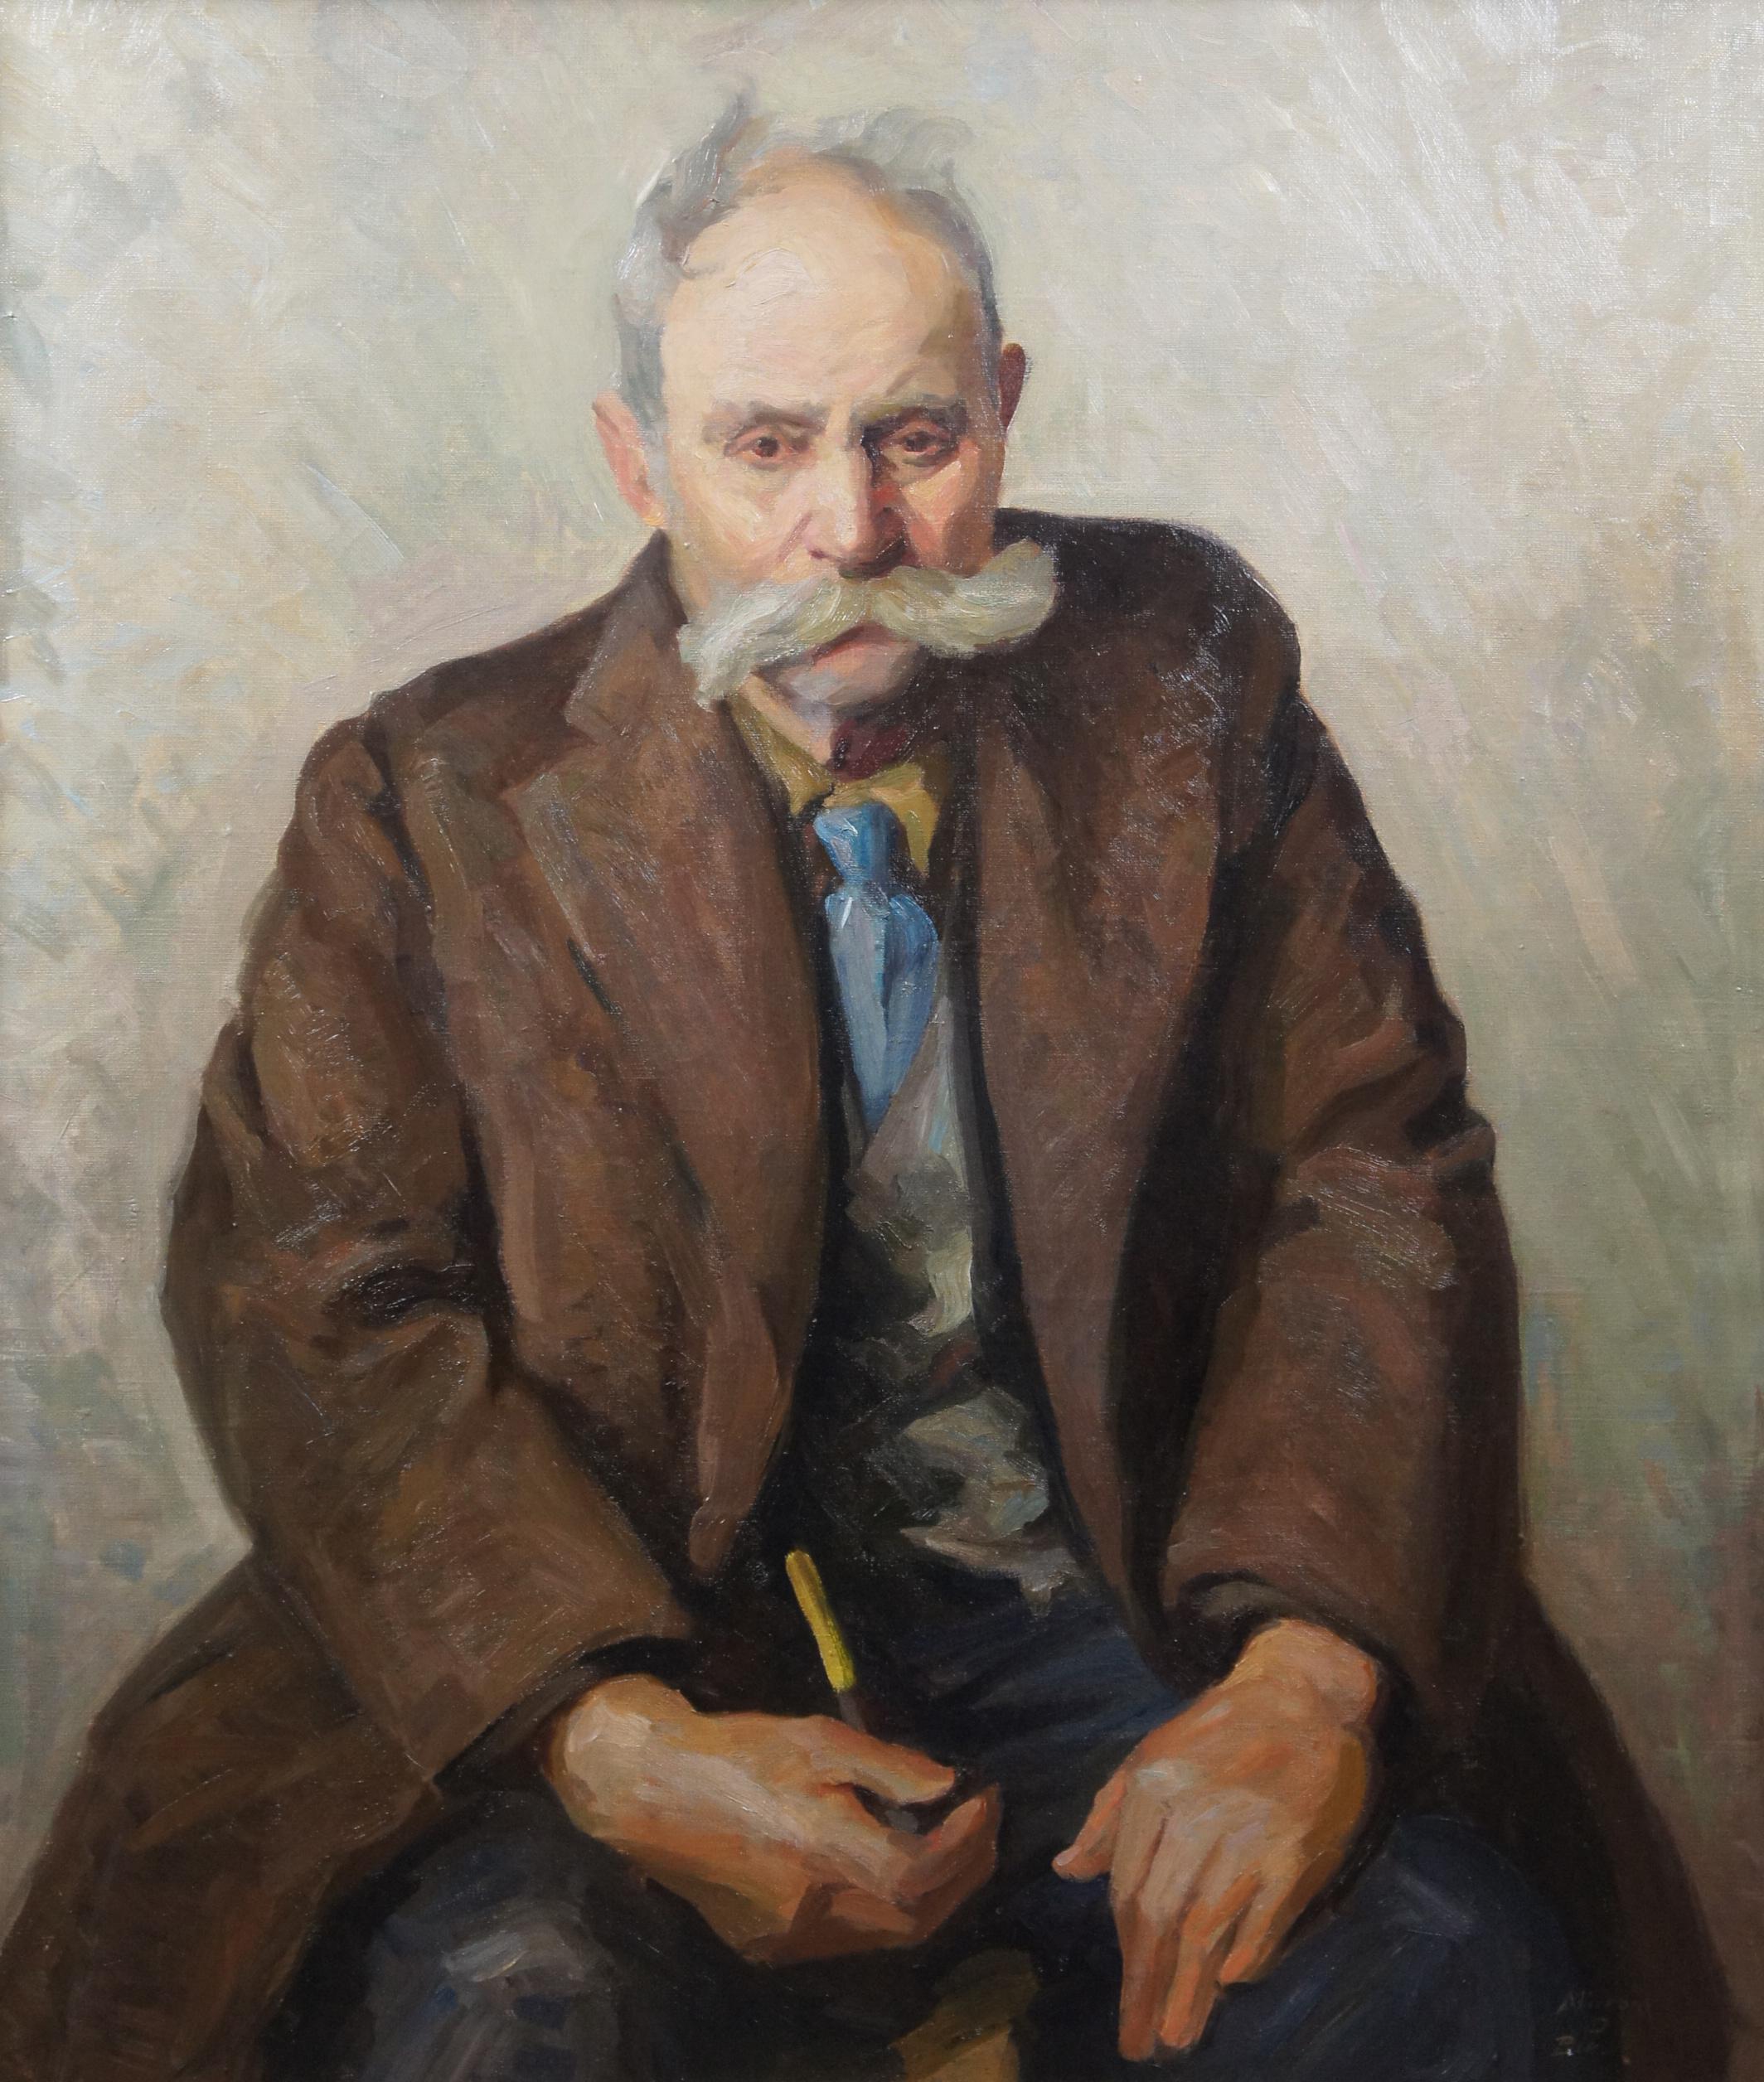 American Classical Milton D Birch 20th Century Canvas Oil Painting Portrait of Old Man Smoking Pipe